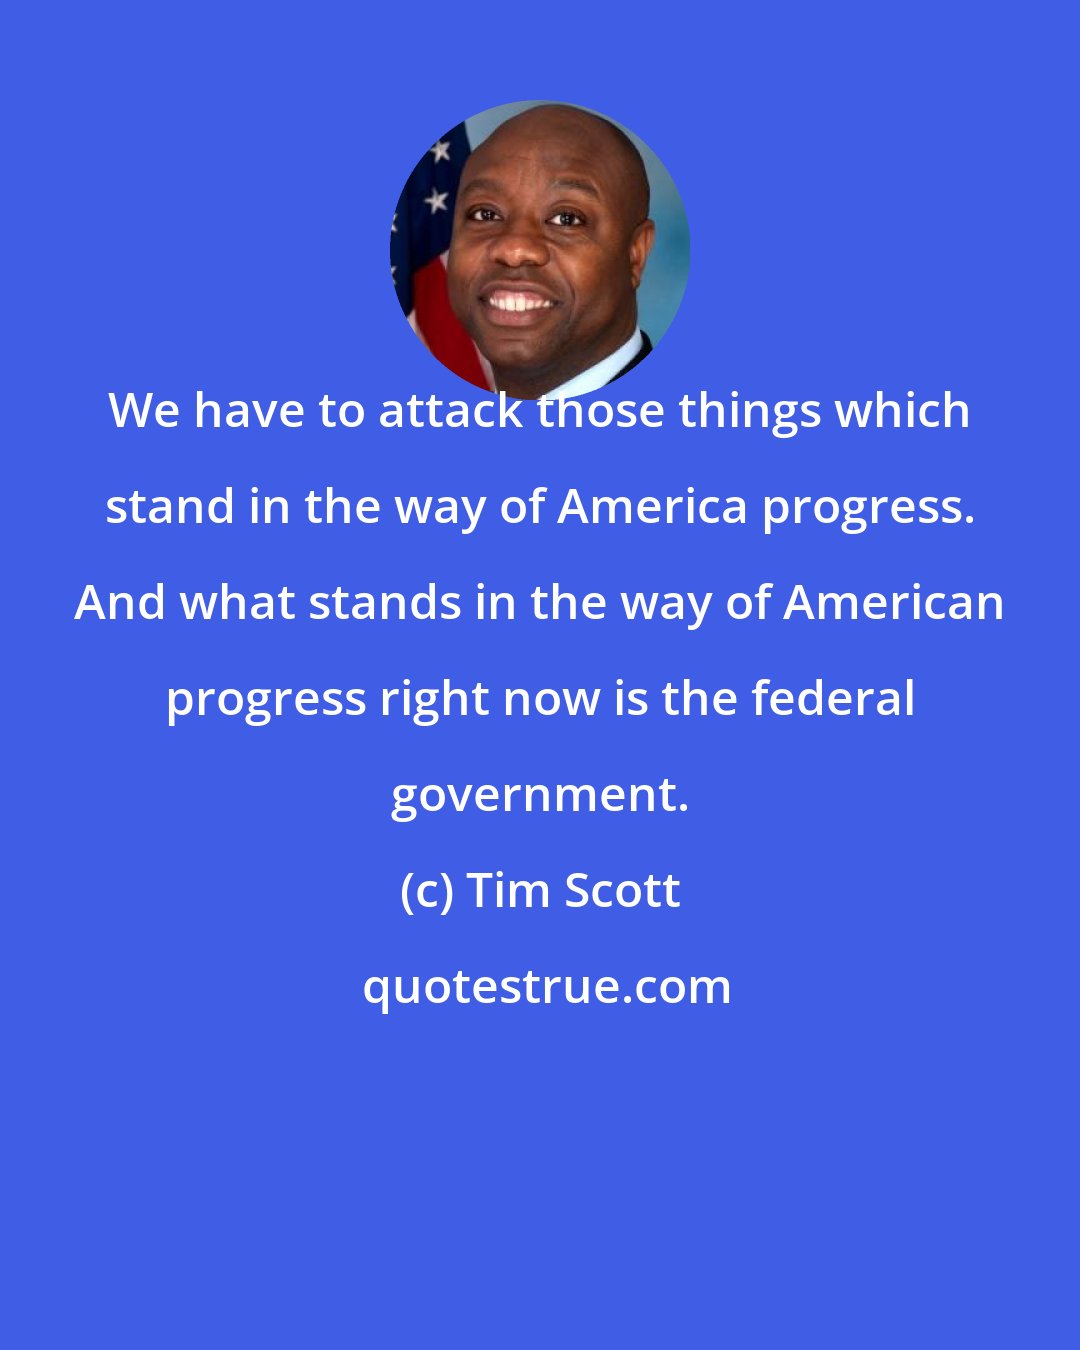 Tim Scott: We have to attack those things which stand in the way of America progress. And what stands in the way of American progress right now is the federal government.